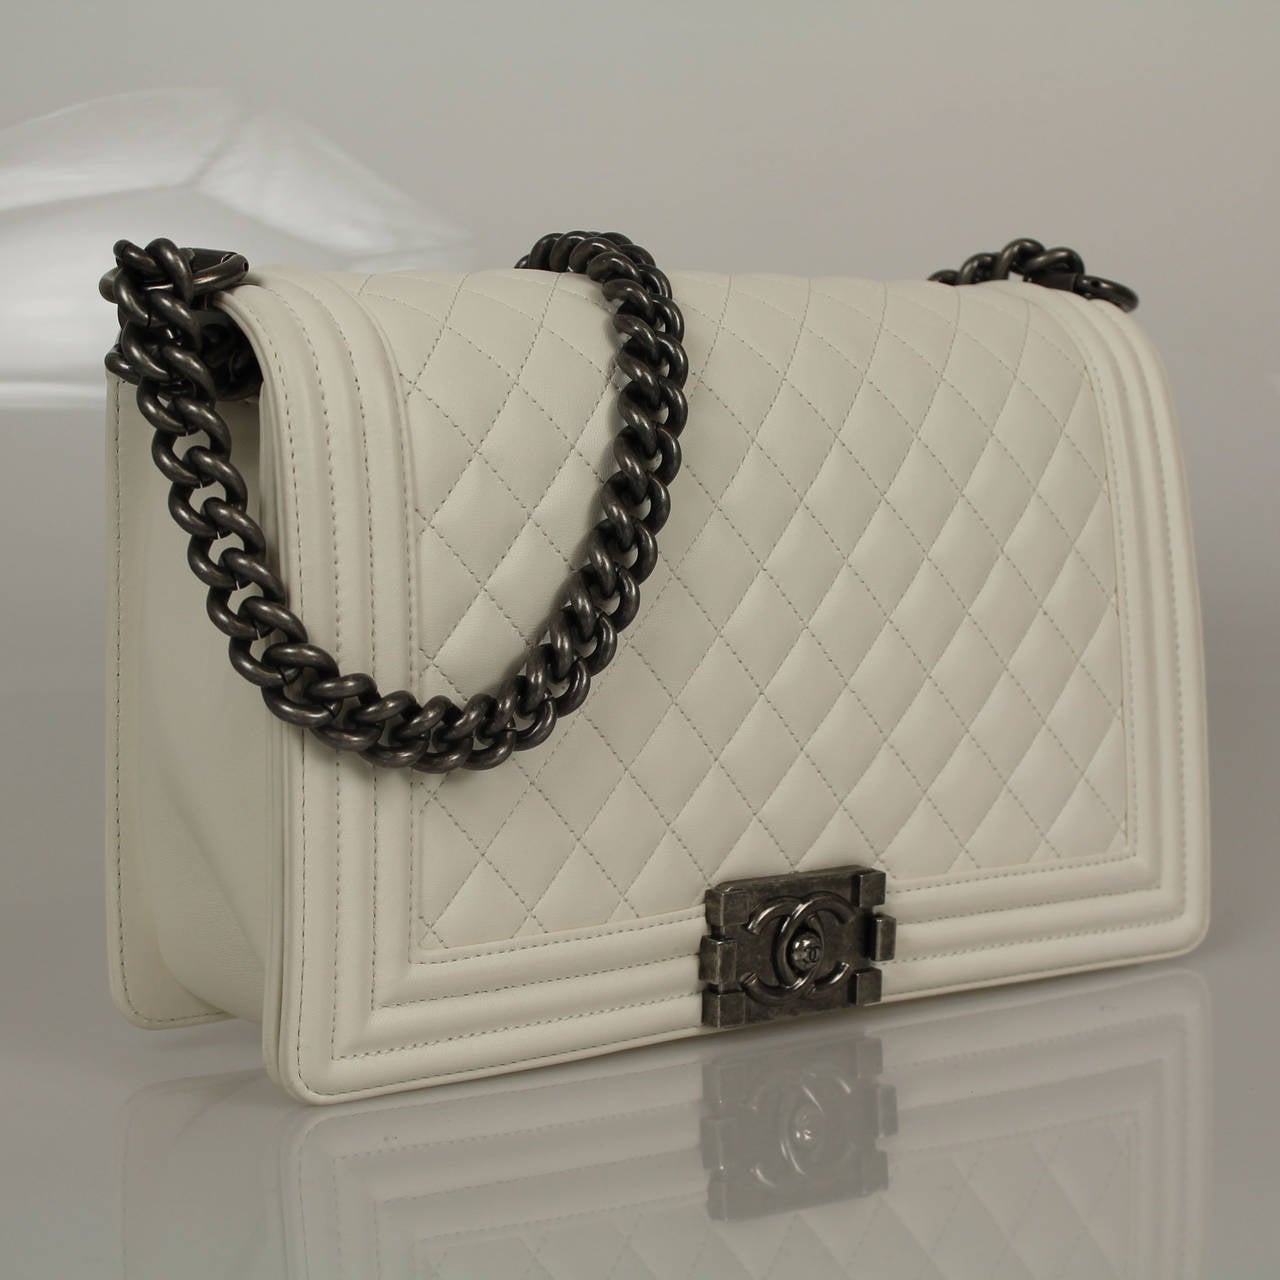 Medium Boy in a exquisite white calfskin with silver metal. The bag is of quilted leather trimmed in smooth leather with smooth leather sides and bottom; it has a full front flap with Boy Chanel signature CC push lock closure and silver chain link